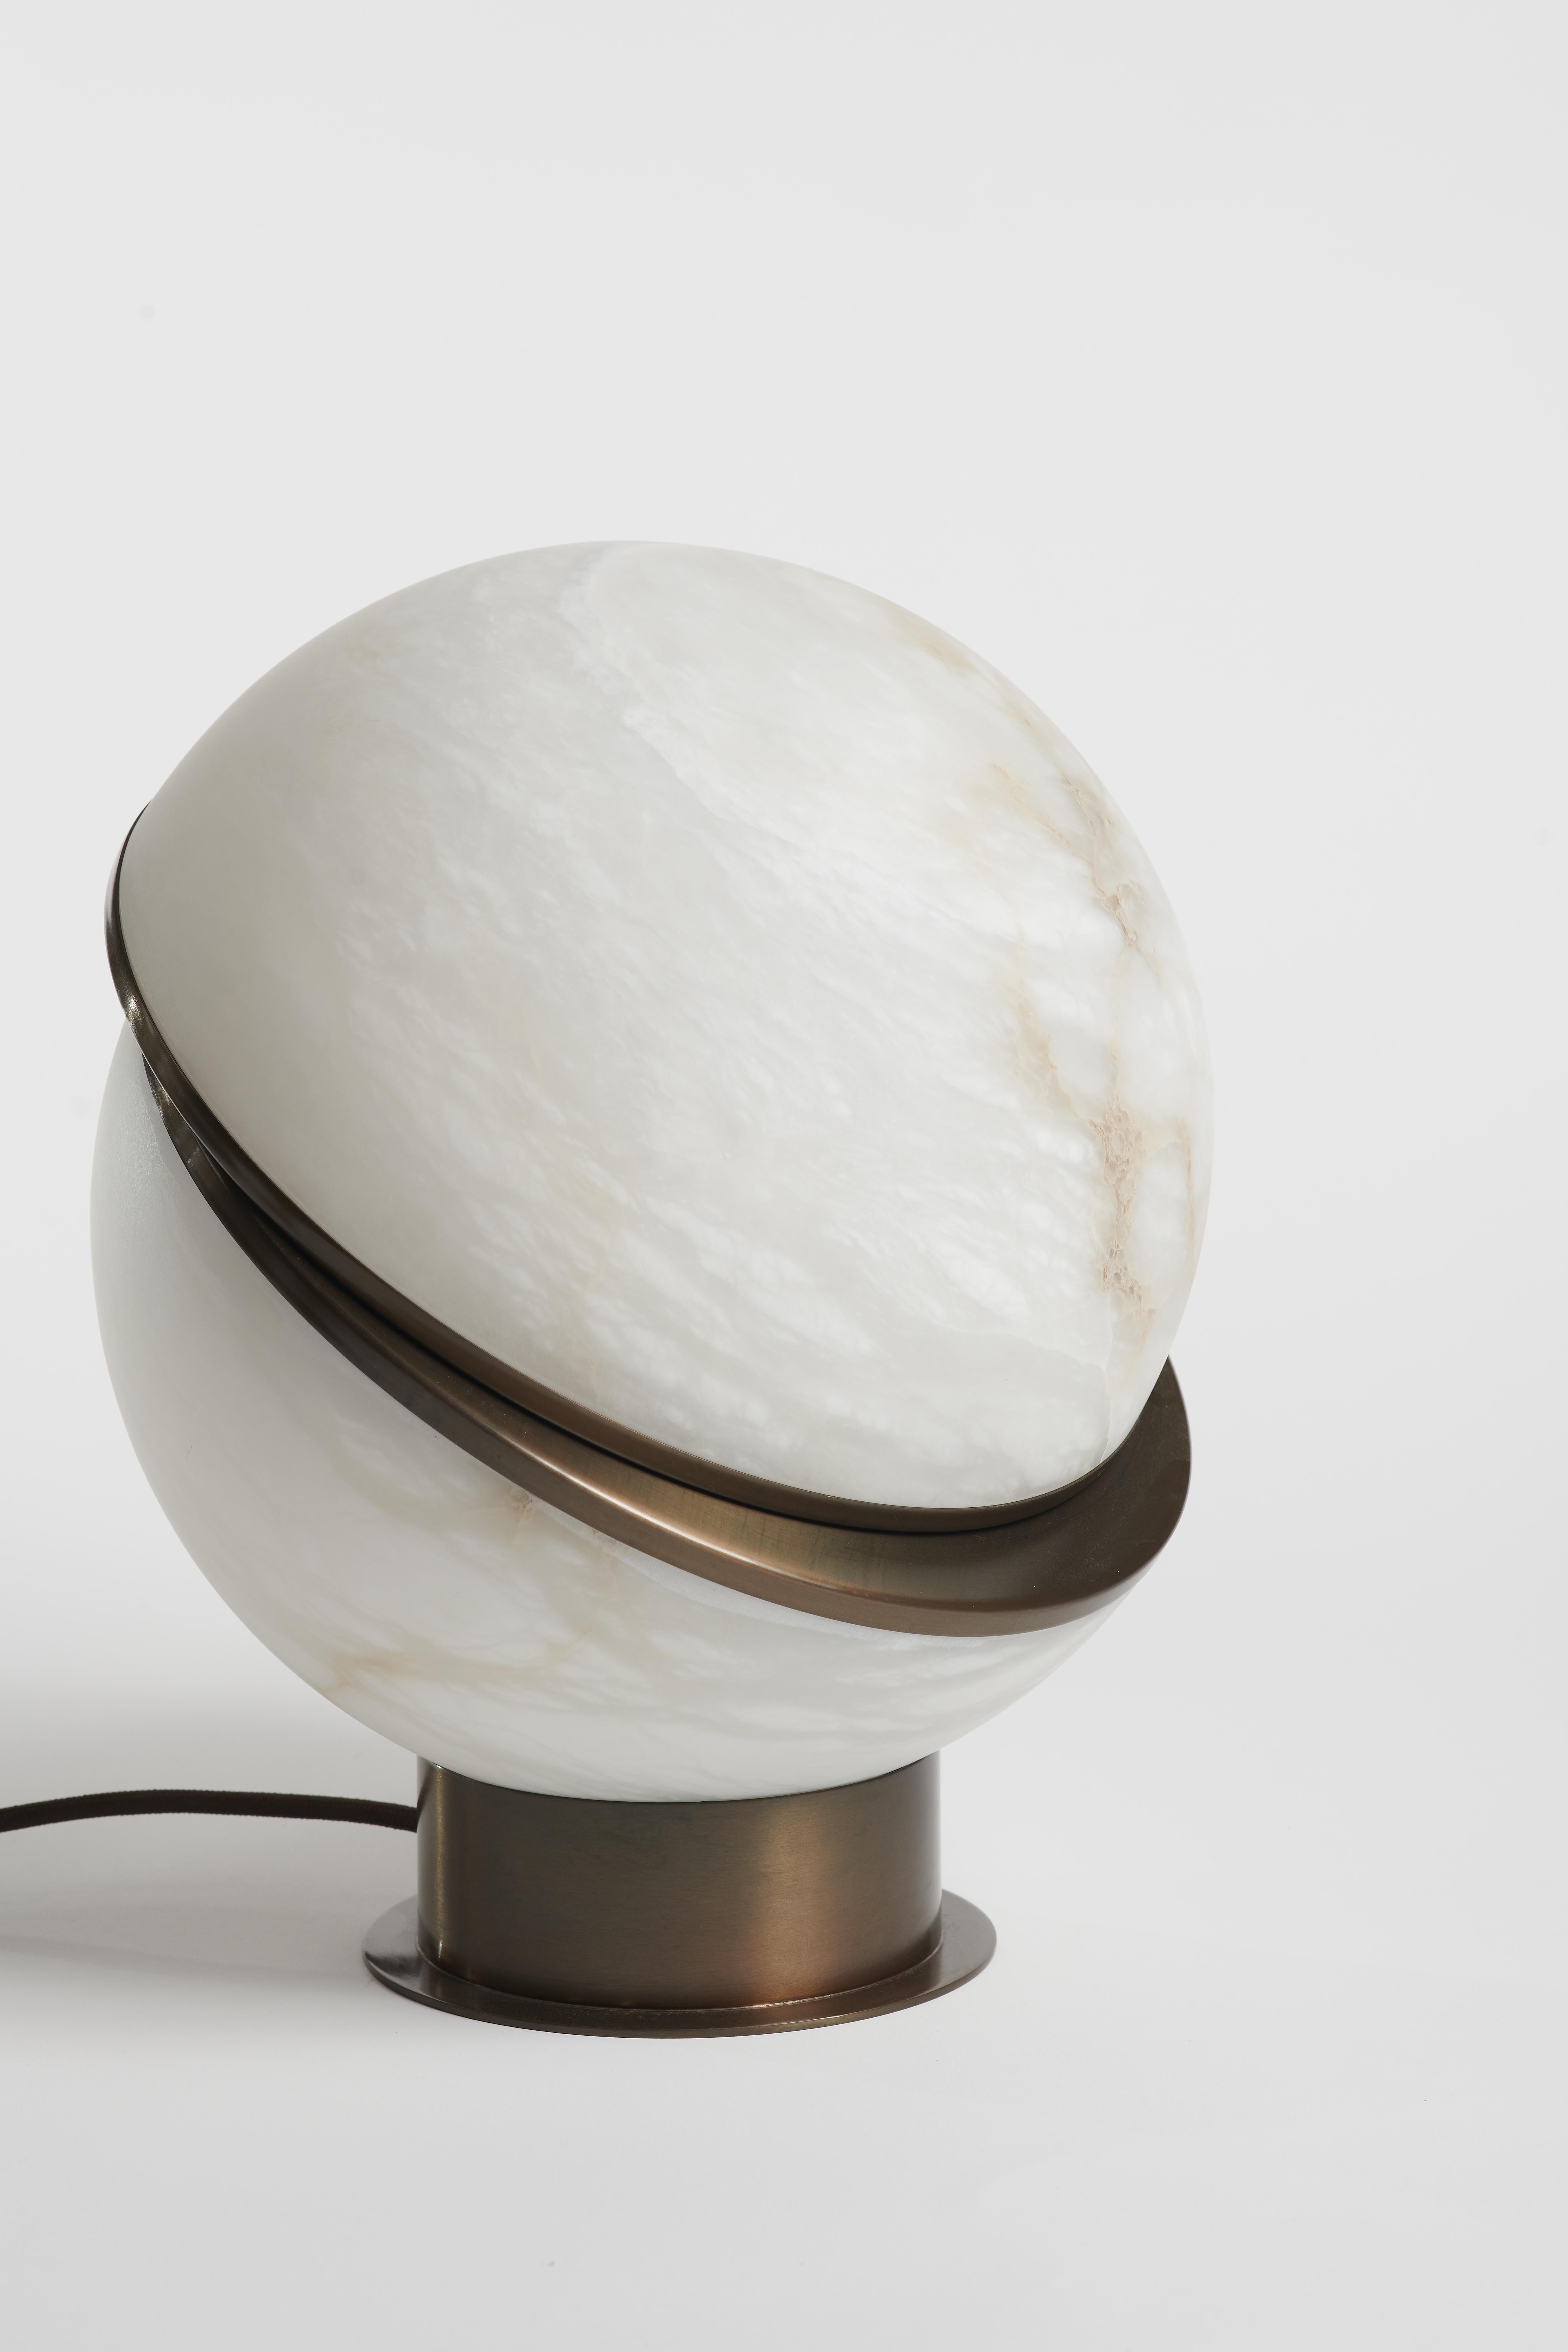 Frosted Modern Italian Ethereal Allure of Alabaster - Offset Globe Lamp in bronze For Sale